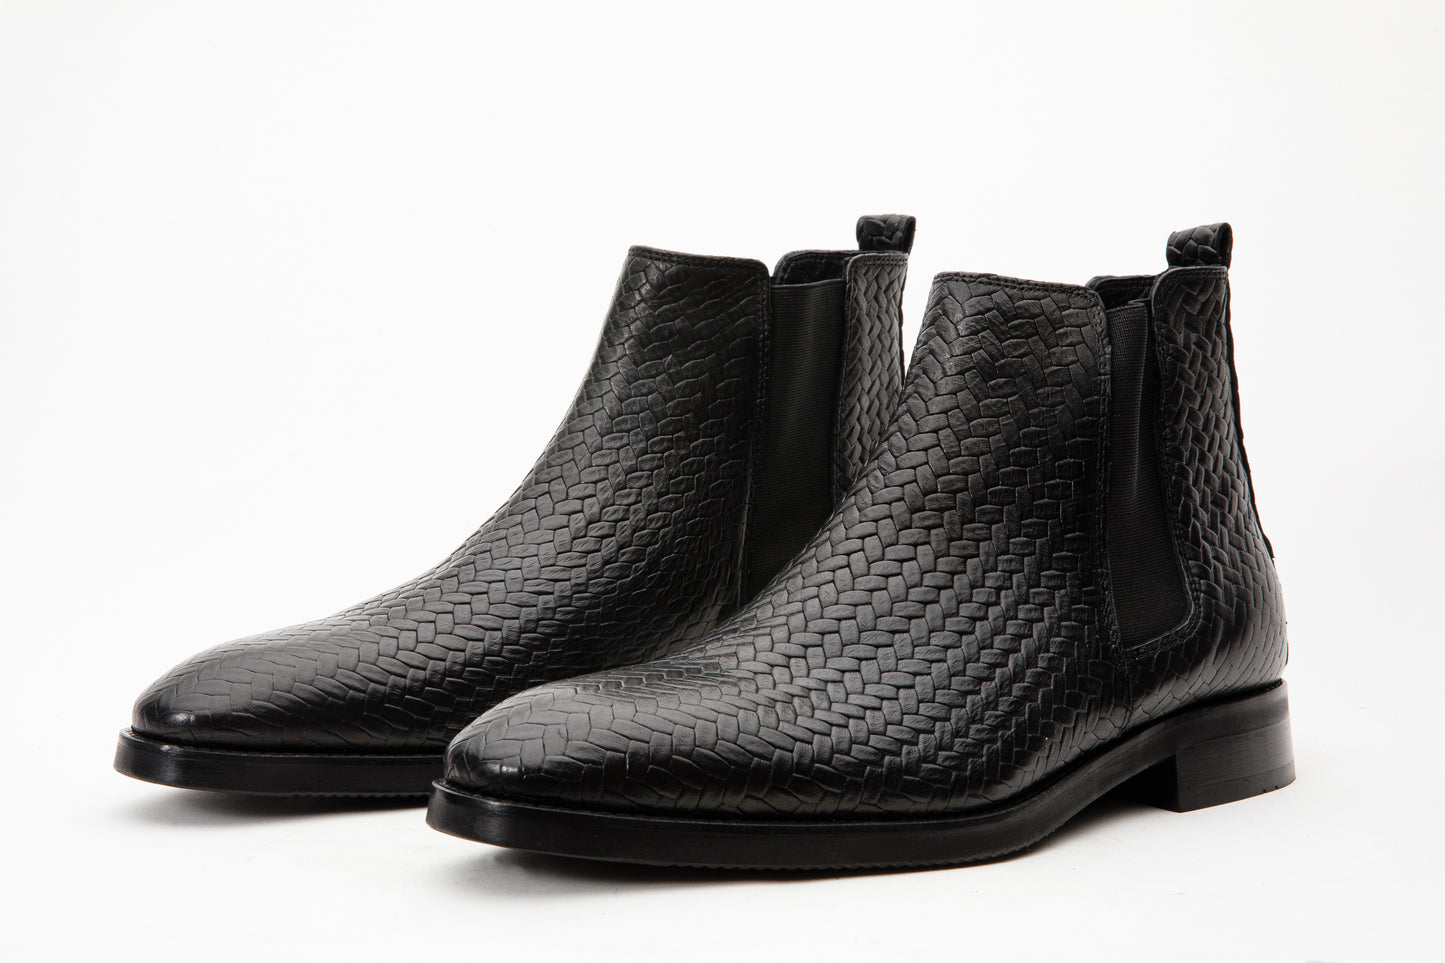 The Oslo Black Leather Chelsea Men Boot